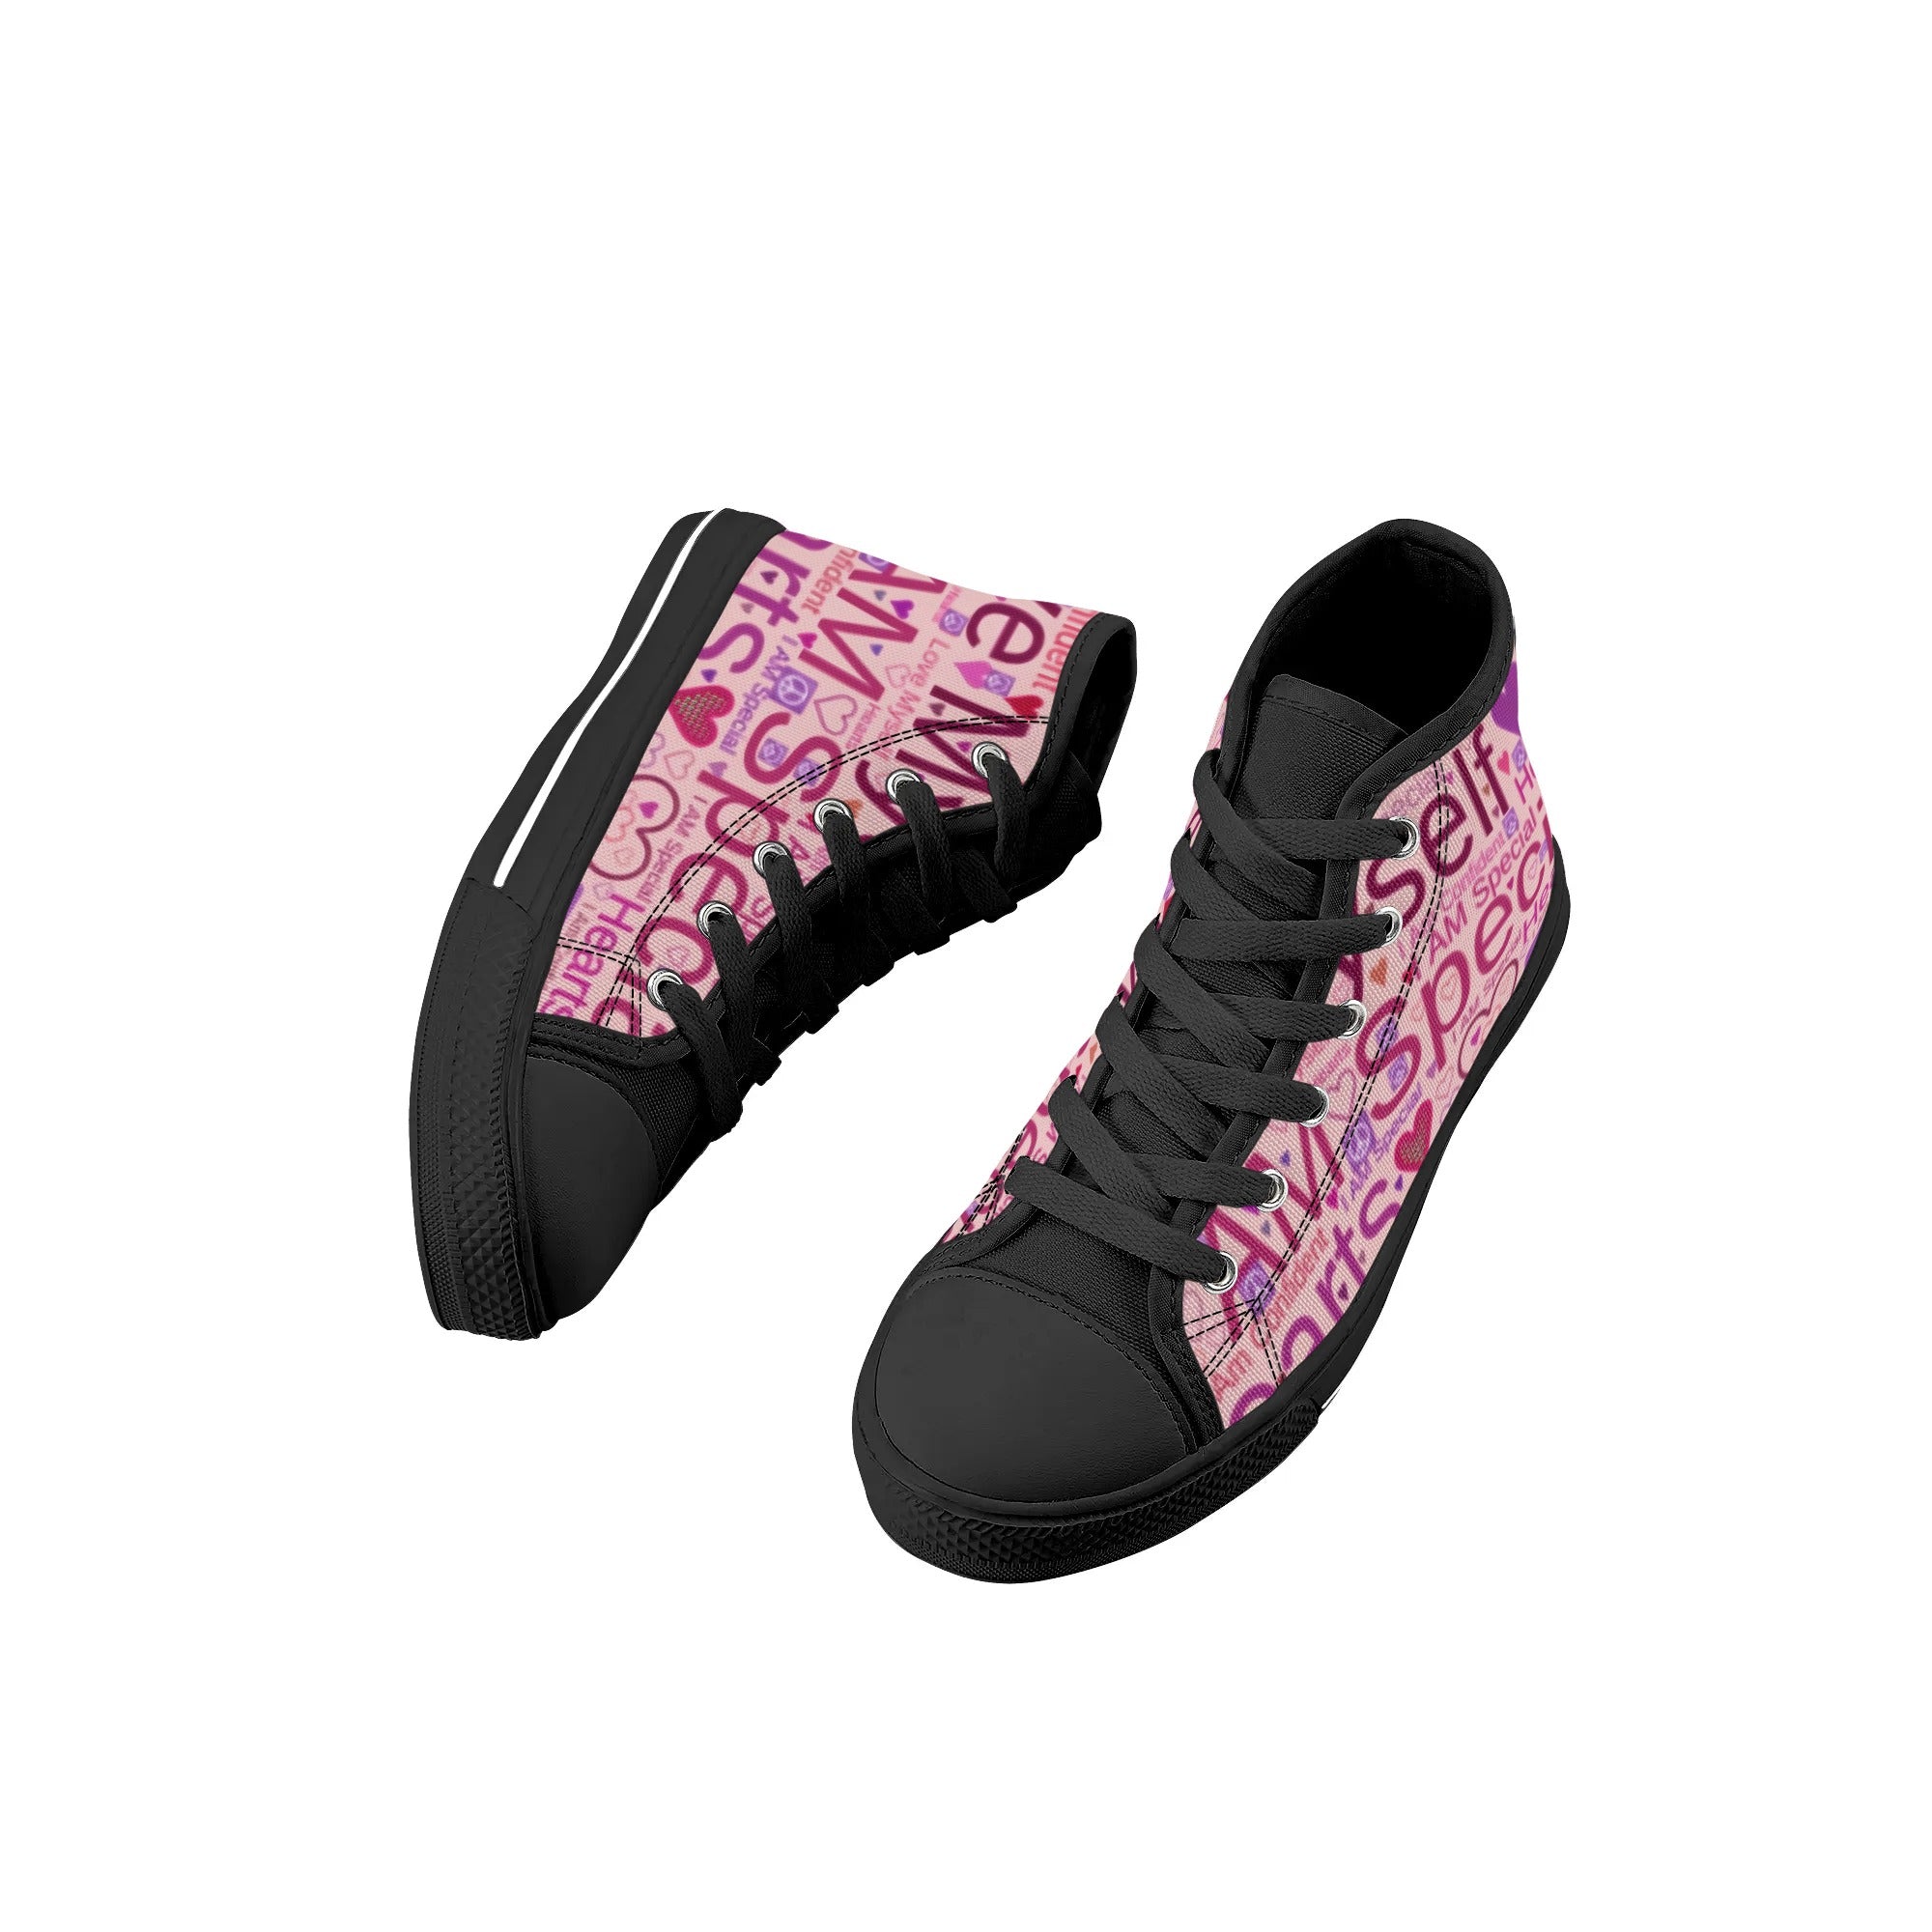 Speak-Over Kids Rubber High Top Canvas Shoes